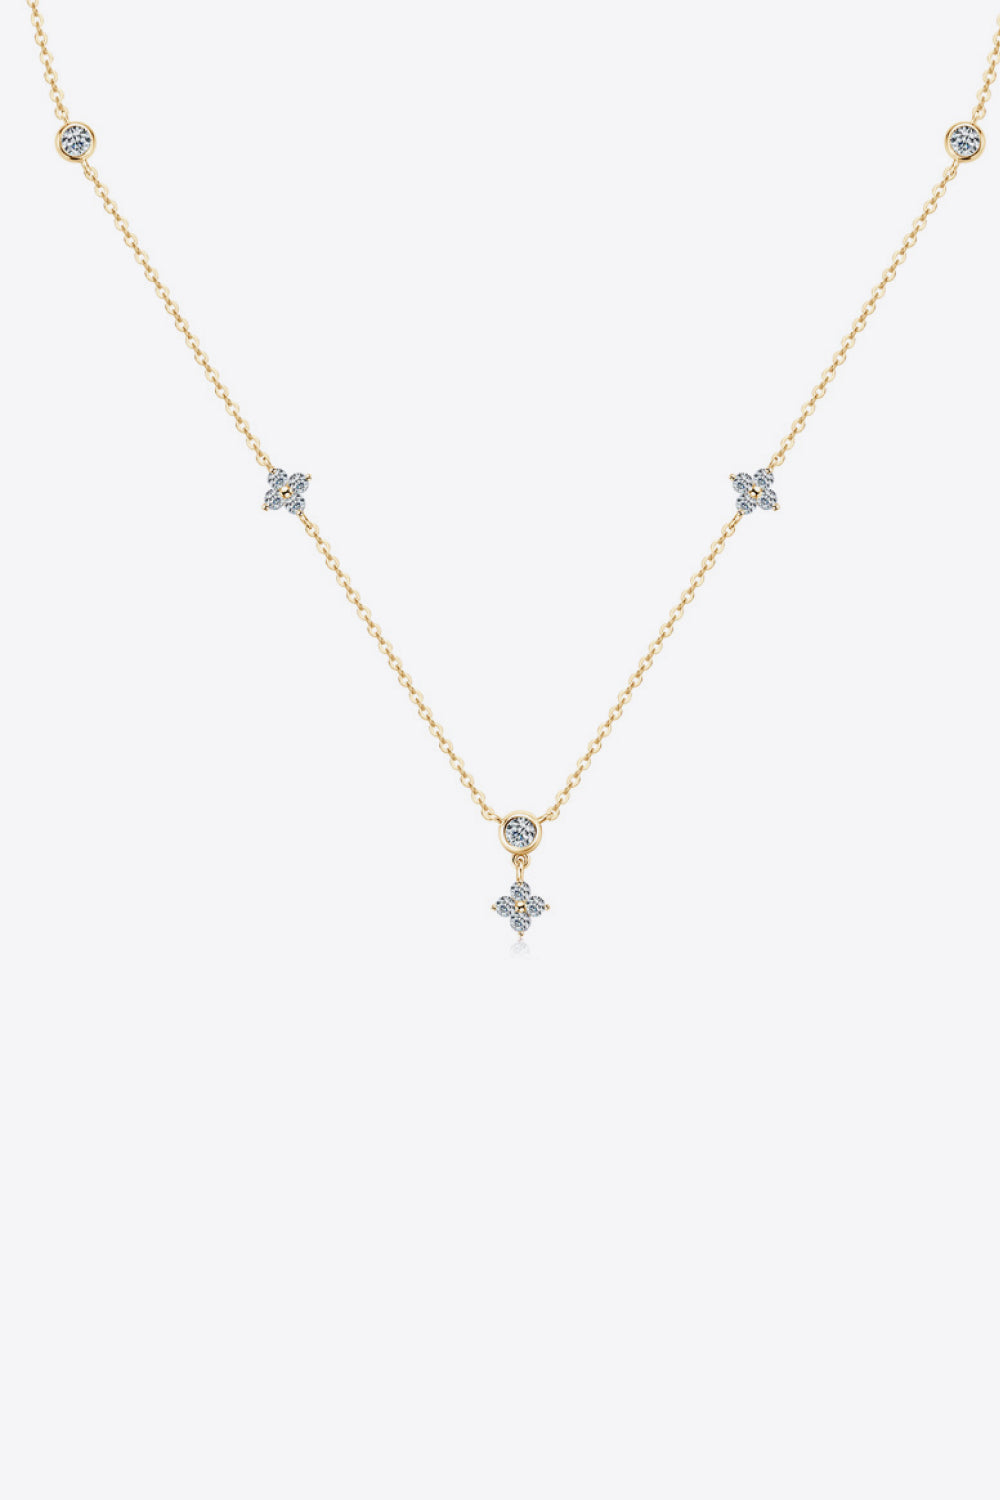 Moissanite 925 Sterling Silver Necklace - Thandynie